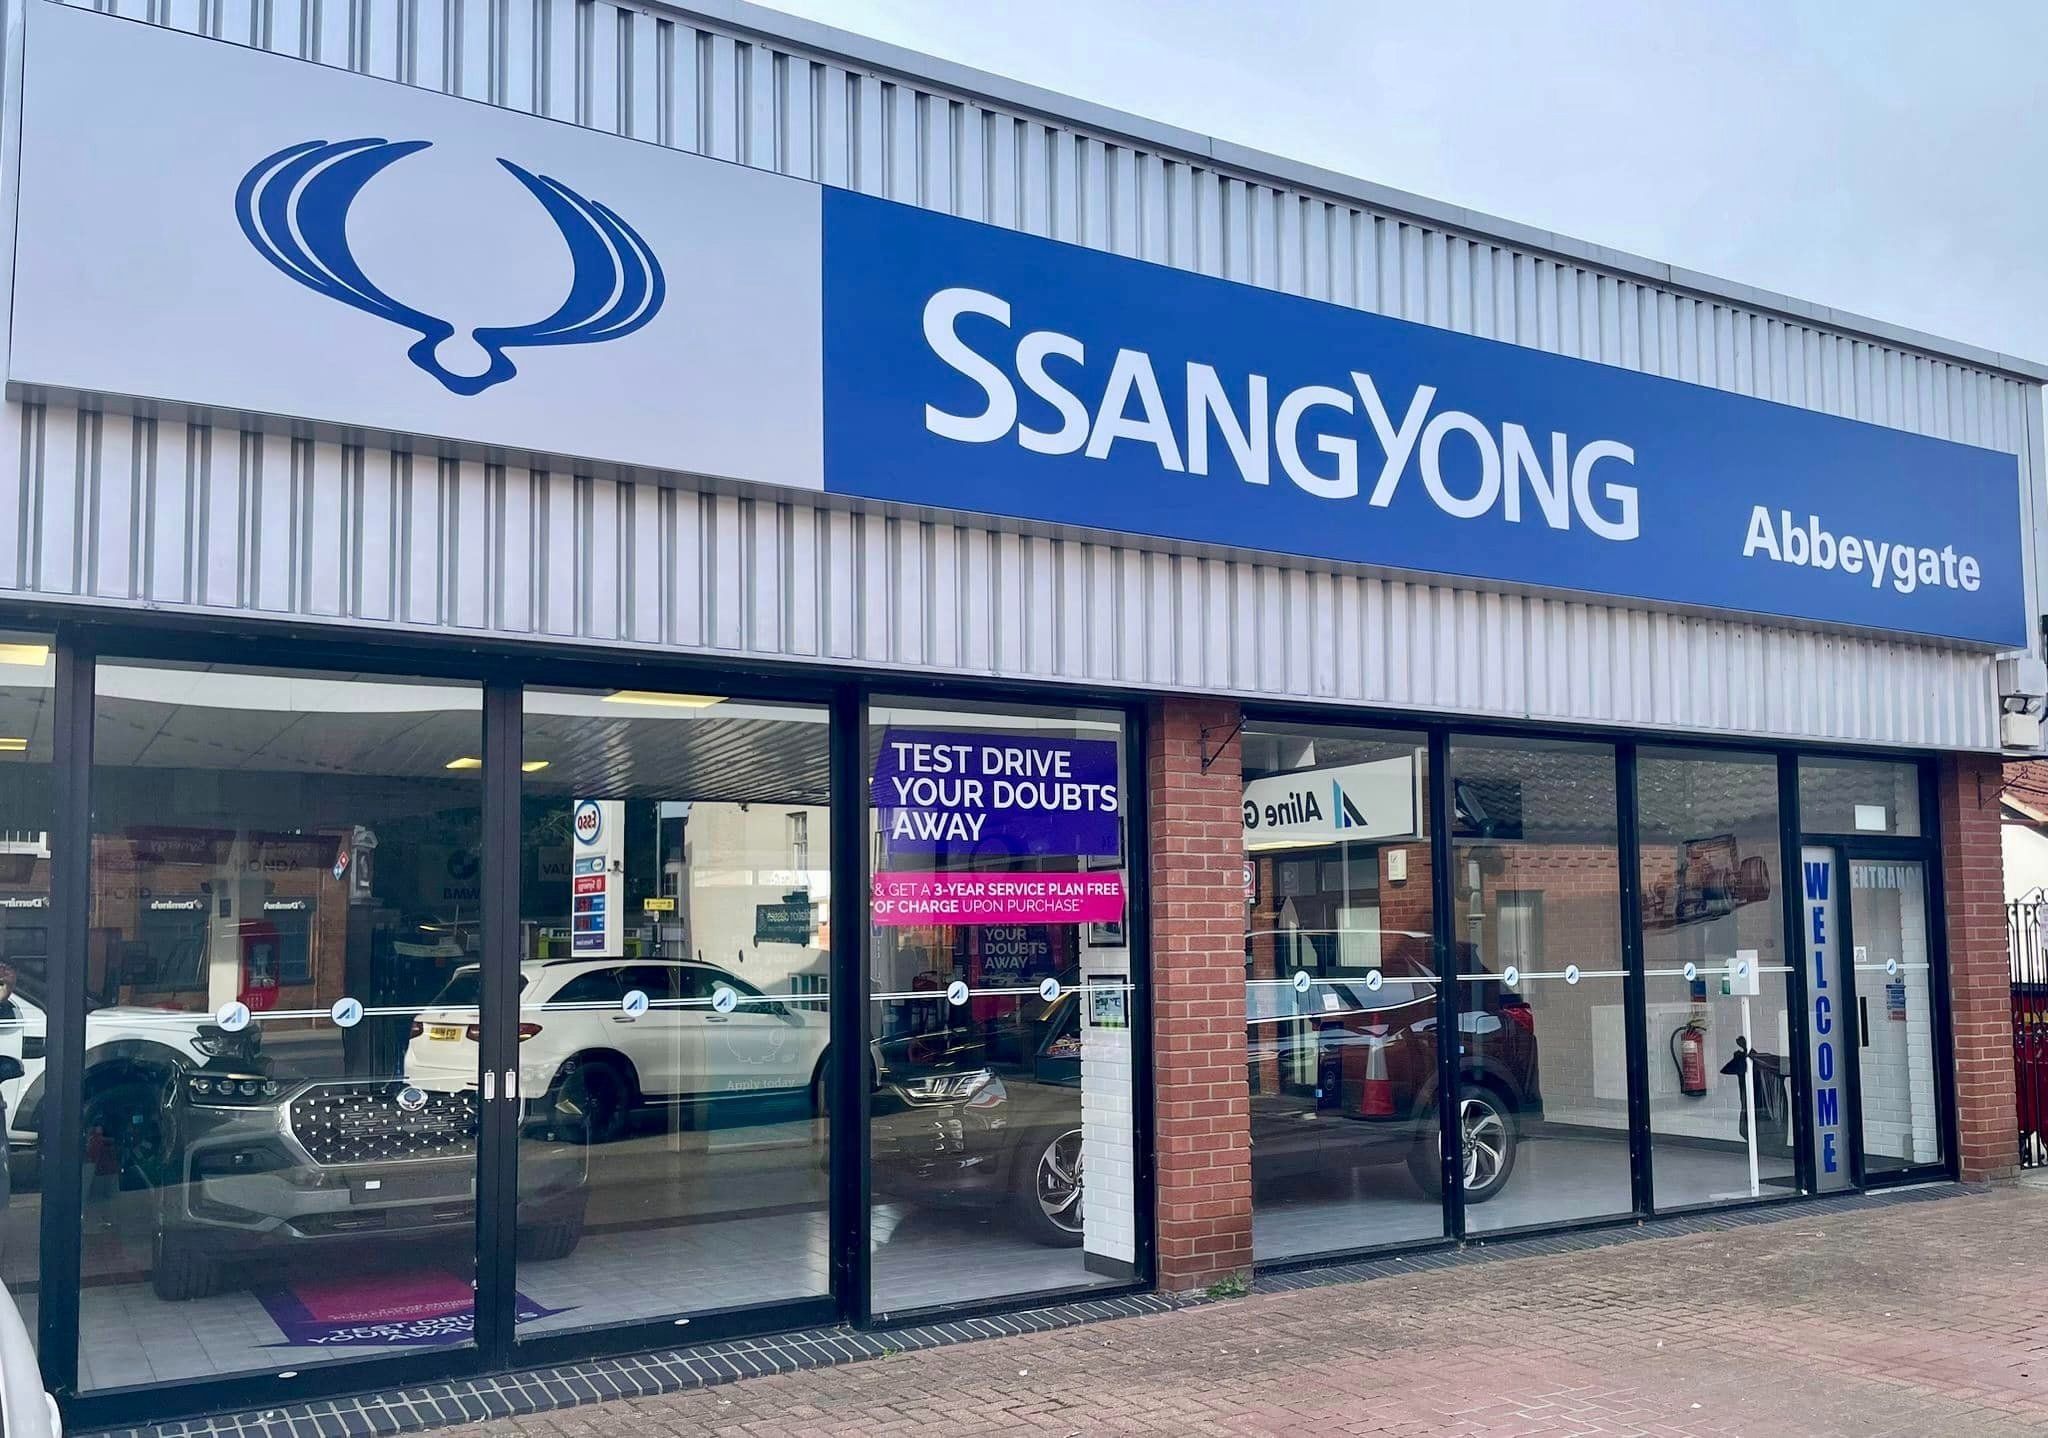 SsangYong Signage